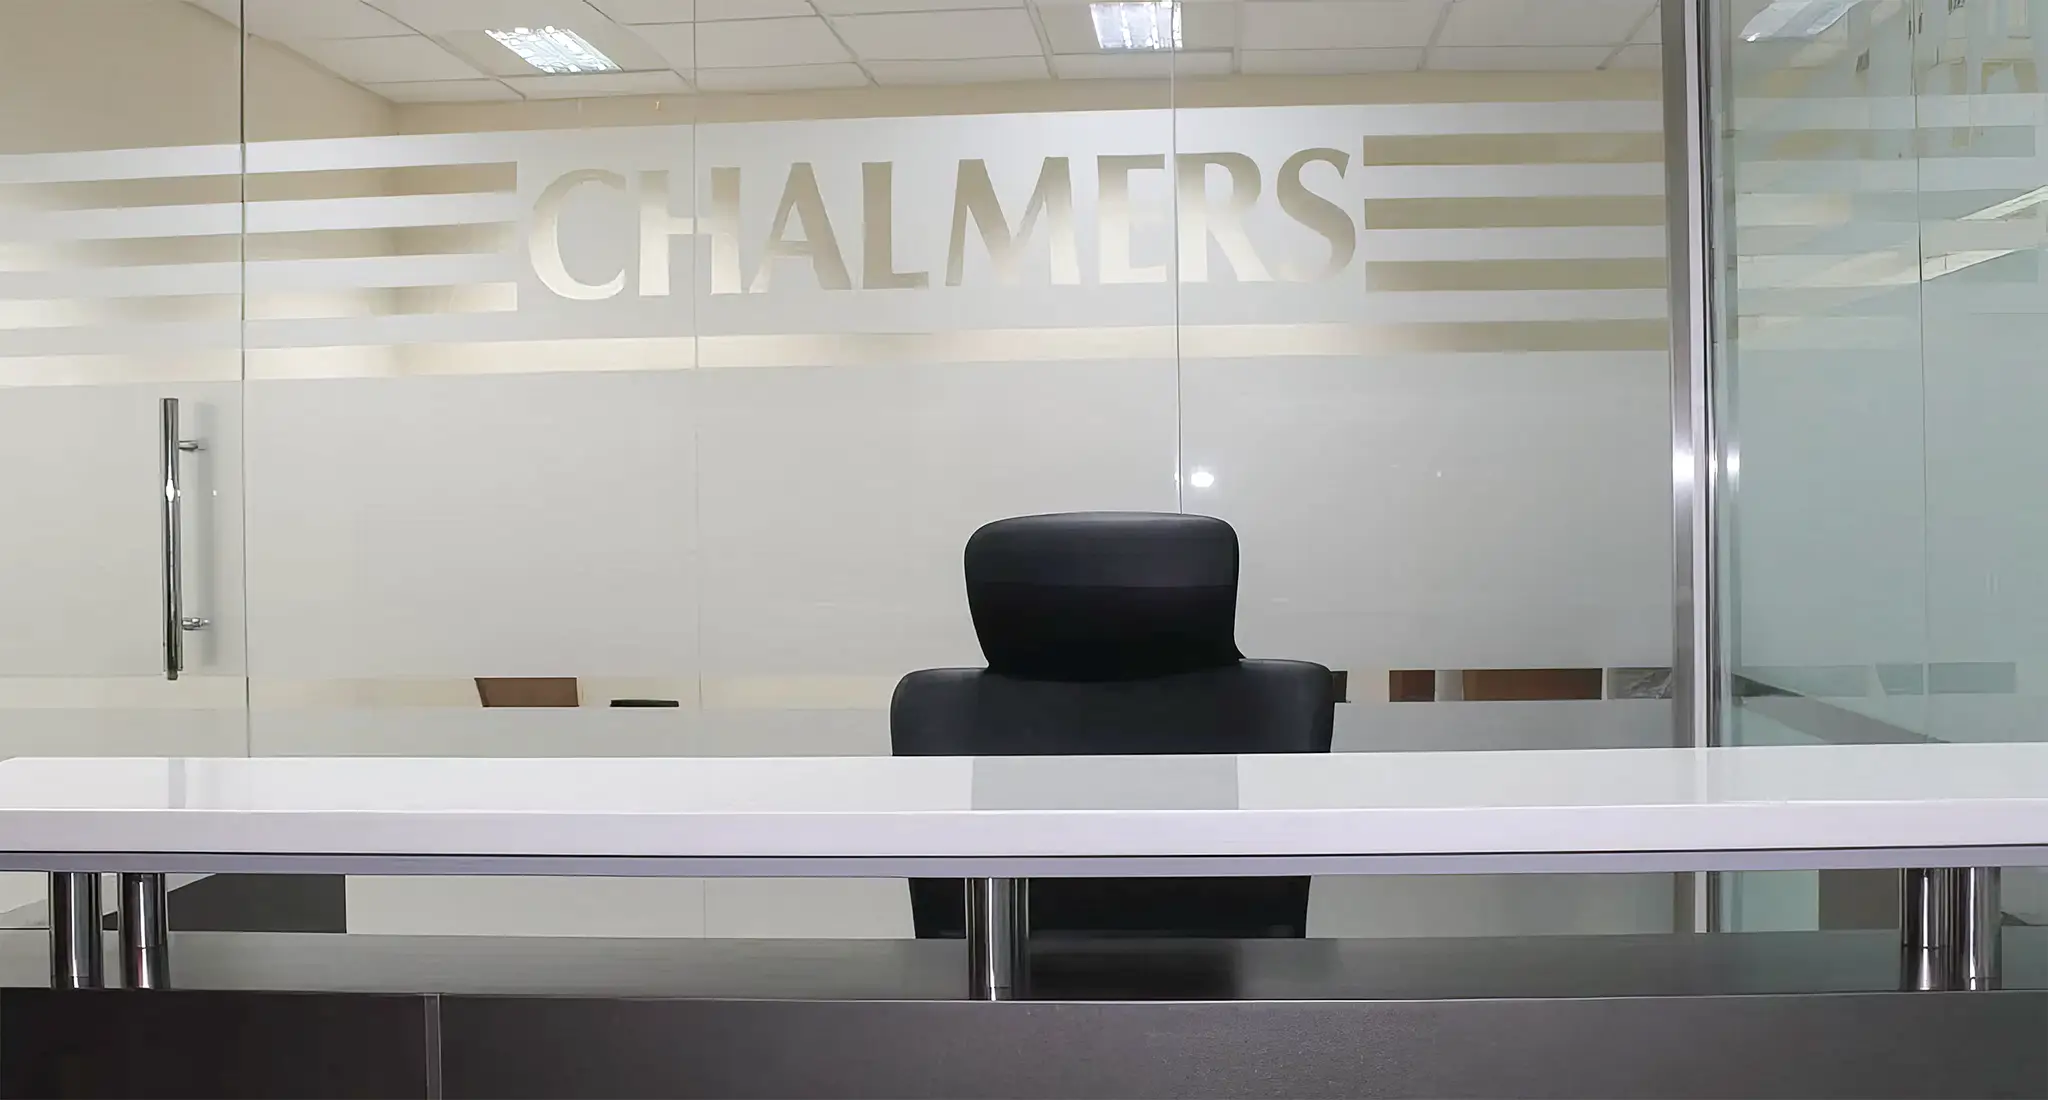 chalmers engineering co. (l.l.c.)'s office features cubicles and desks for a productive work environment.